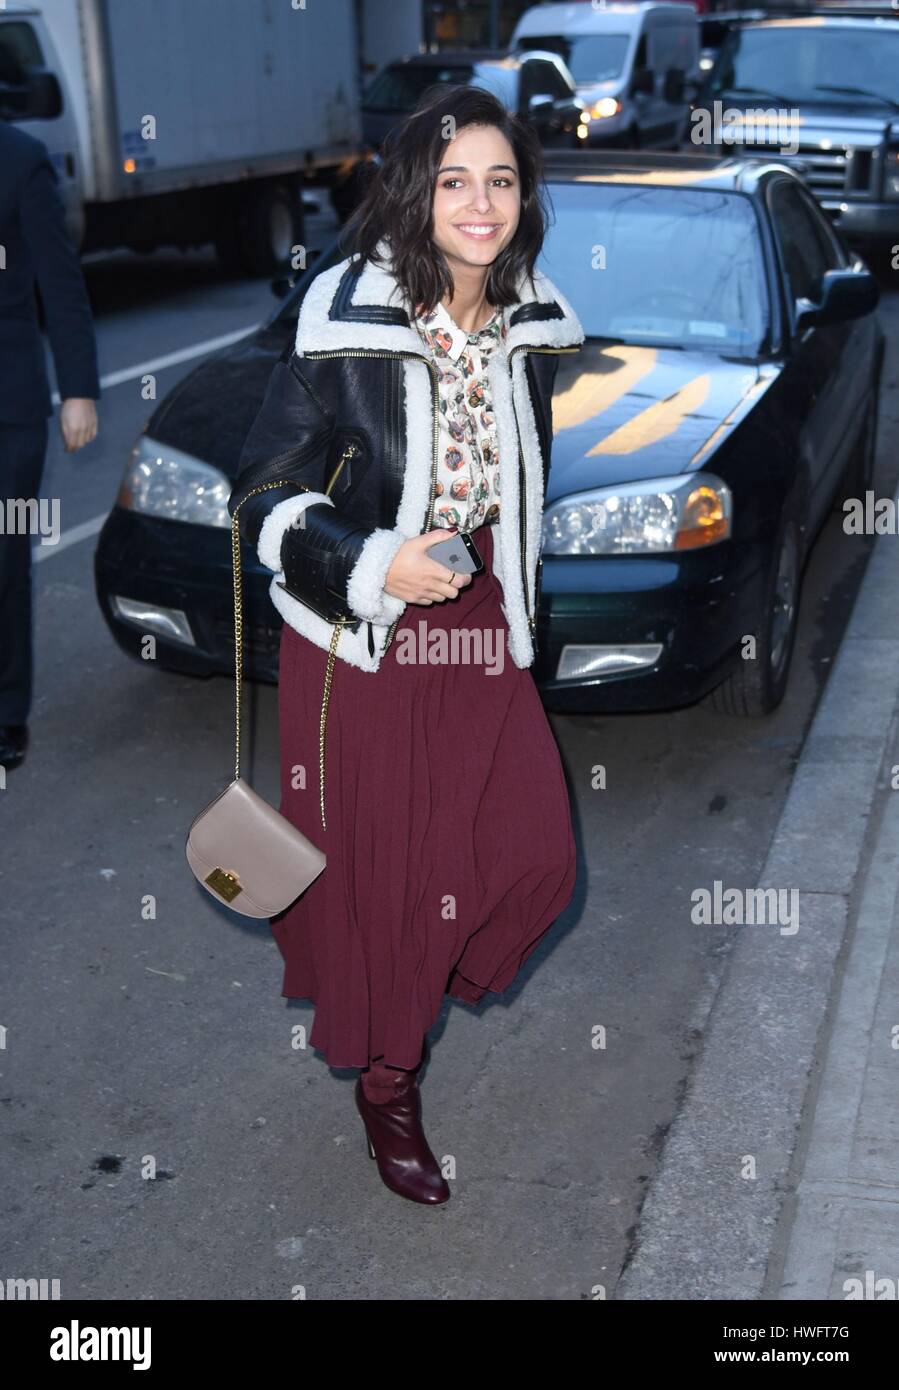 New York, NY, USA. 20th Mar, 2017. Naomi Scott out and about for Celebrity Candids - MON, New York, NY March 20, 2017. Credit: Derek Storm/Everett Collection/Alamy Live News Stock Photo